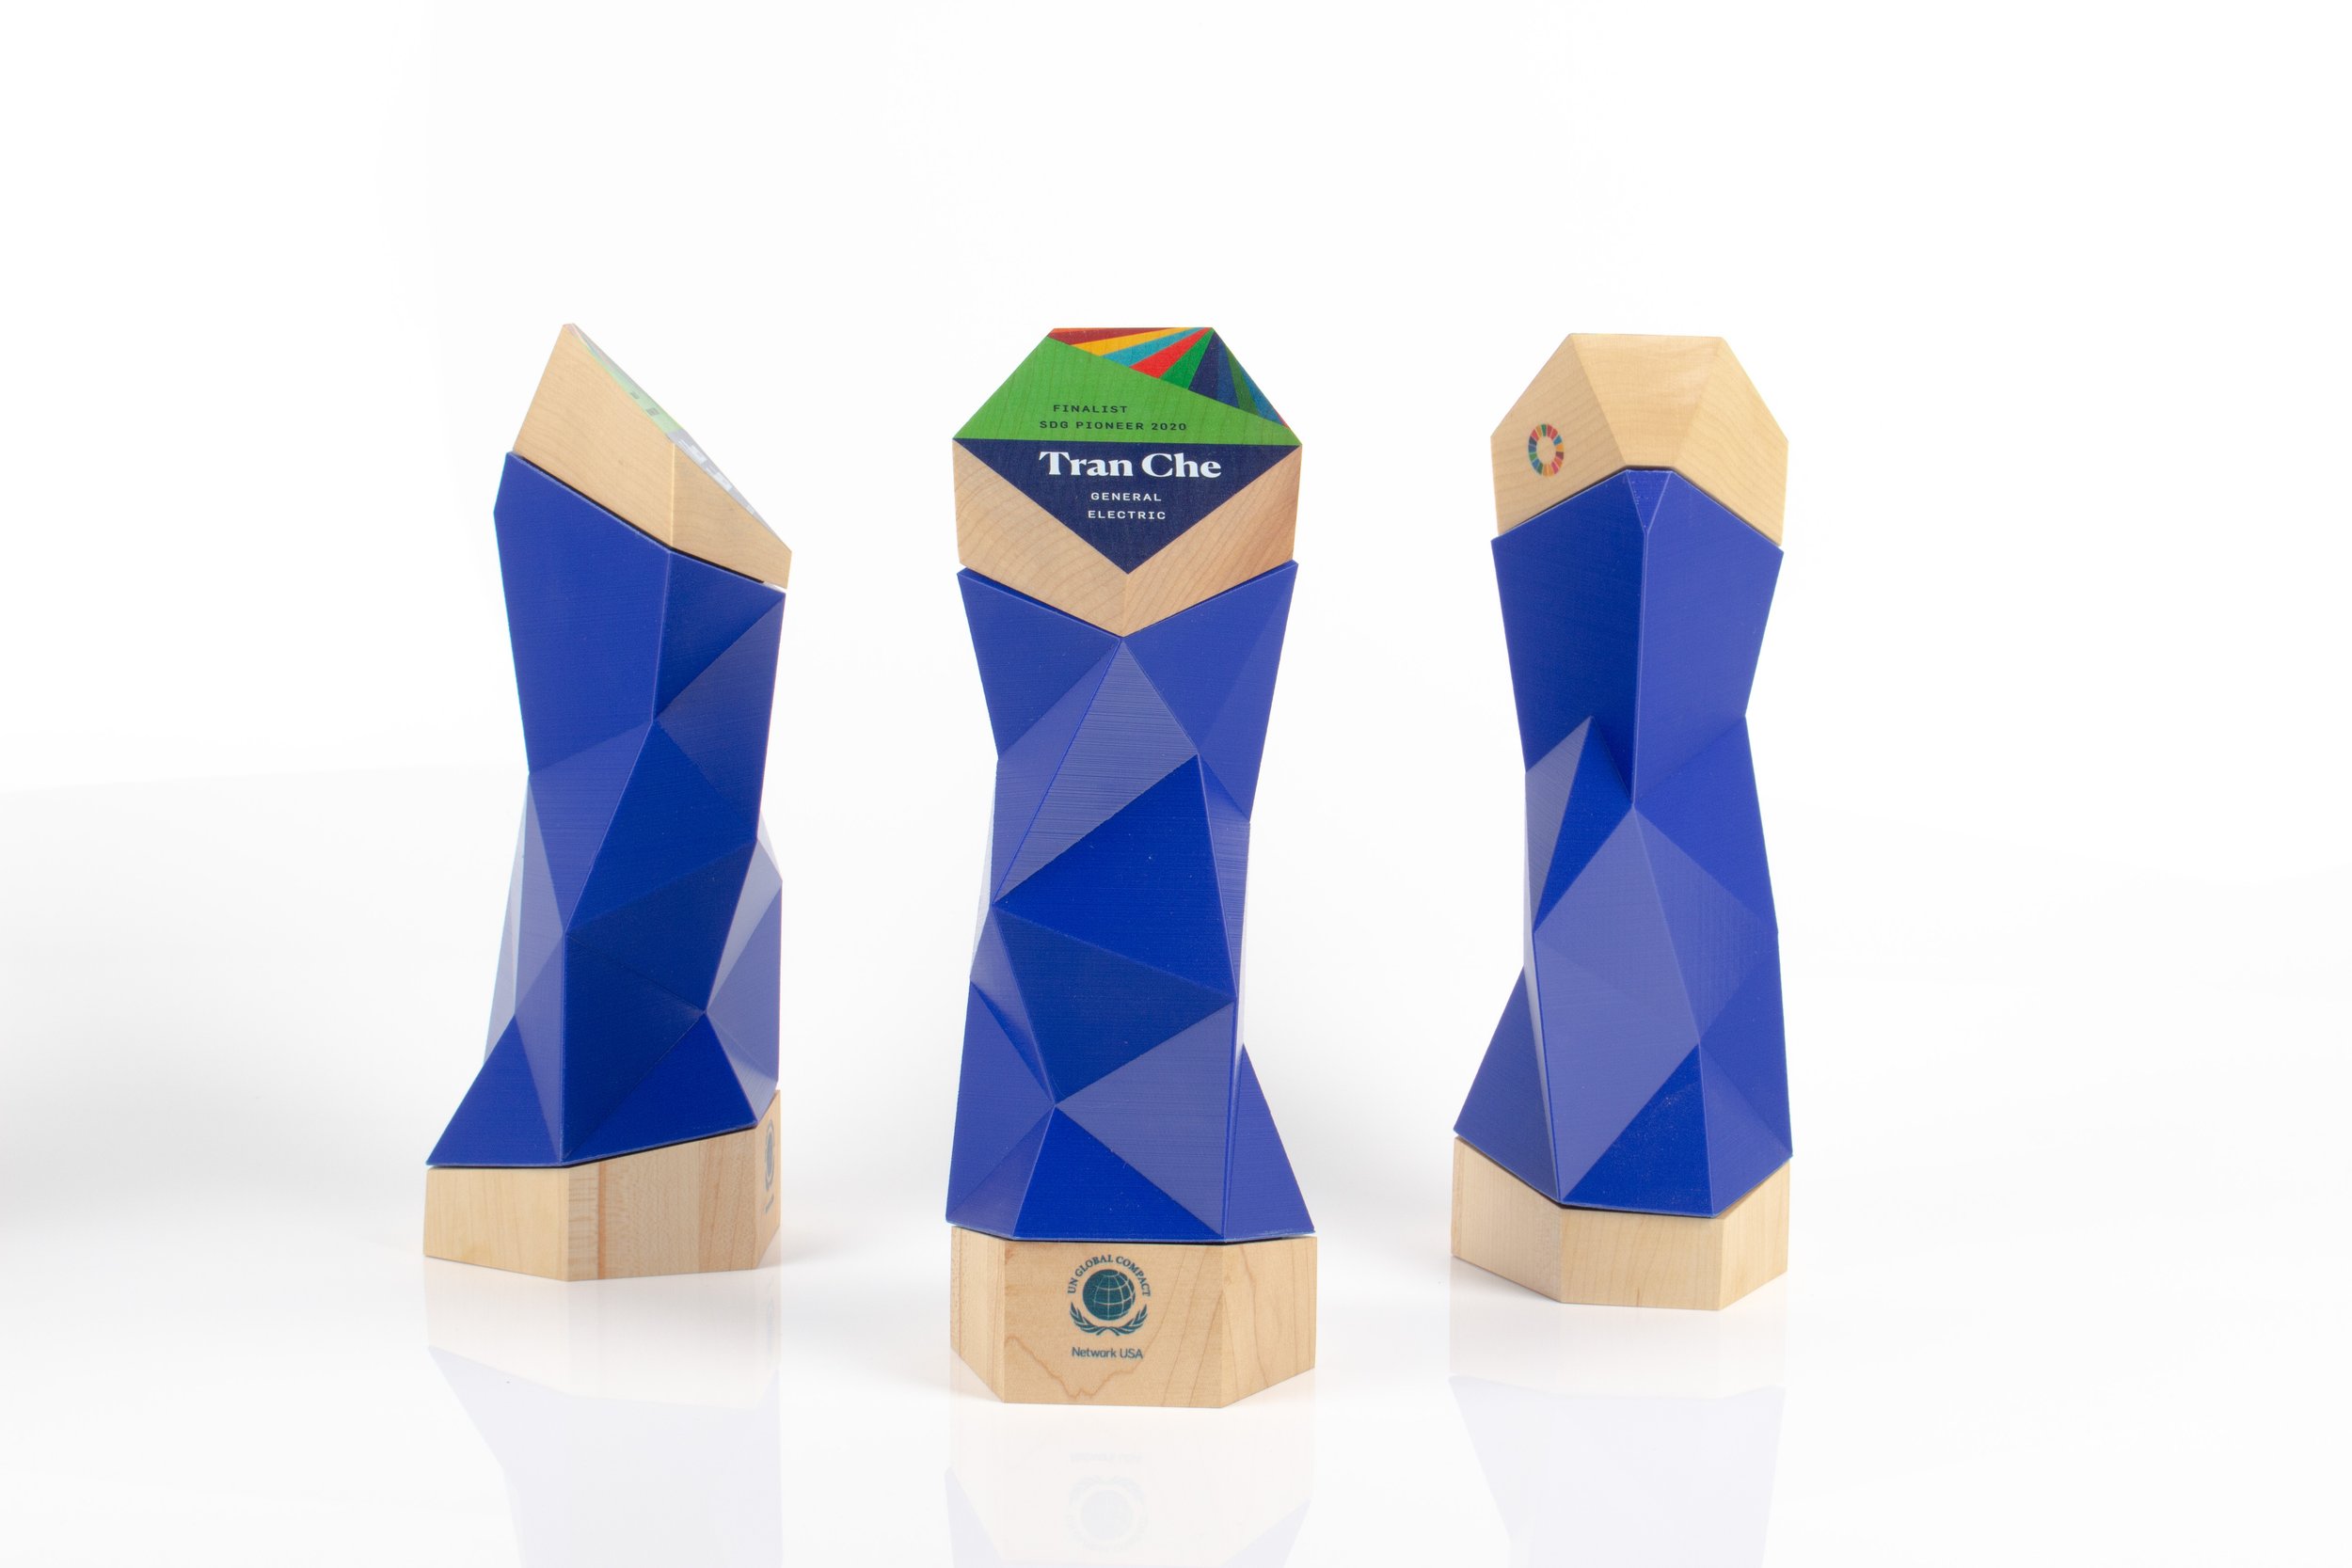 Unique sustainably produced award trophy design for the UN.jpg